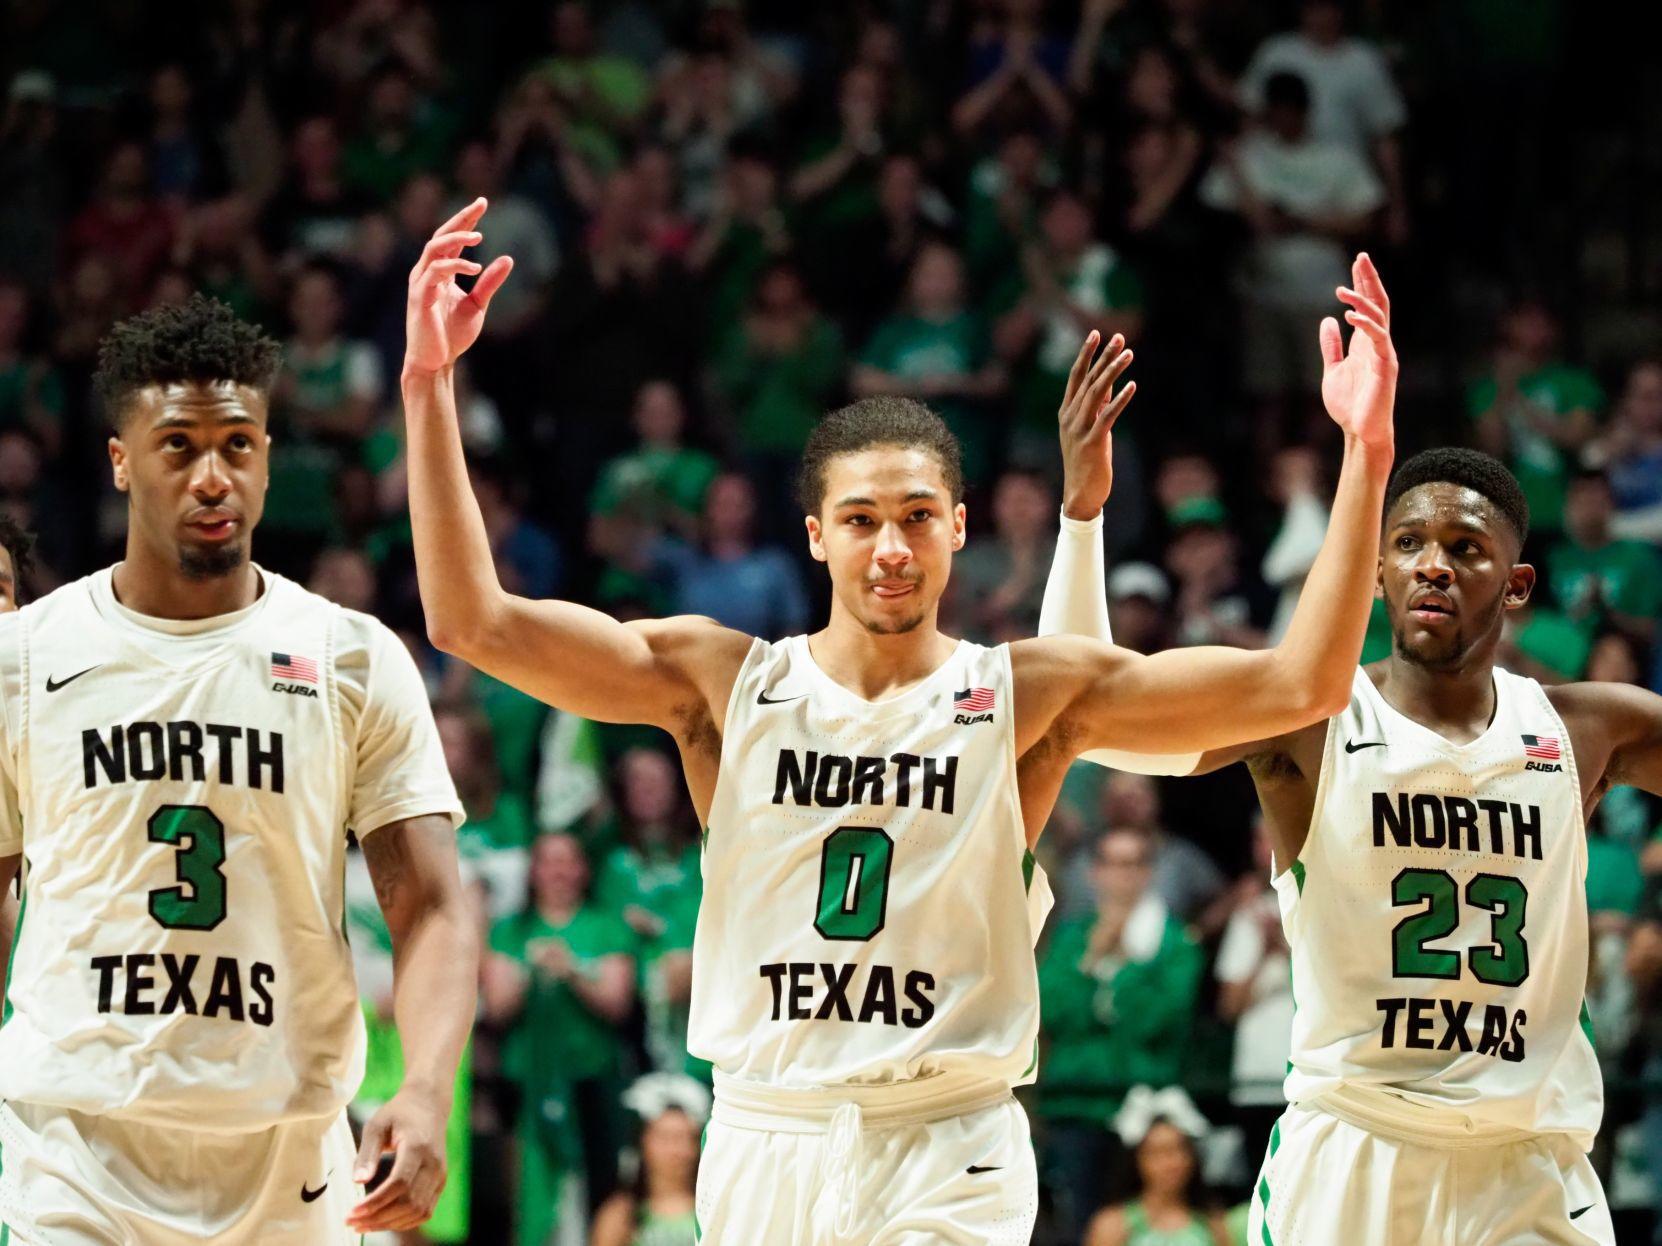 UNT men's basketball team picked to finish fourth in C-USA | Sports | dentonrc.com